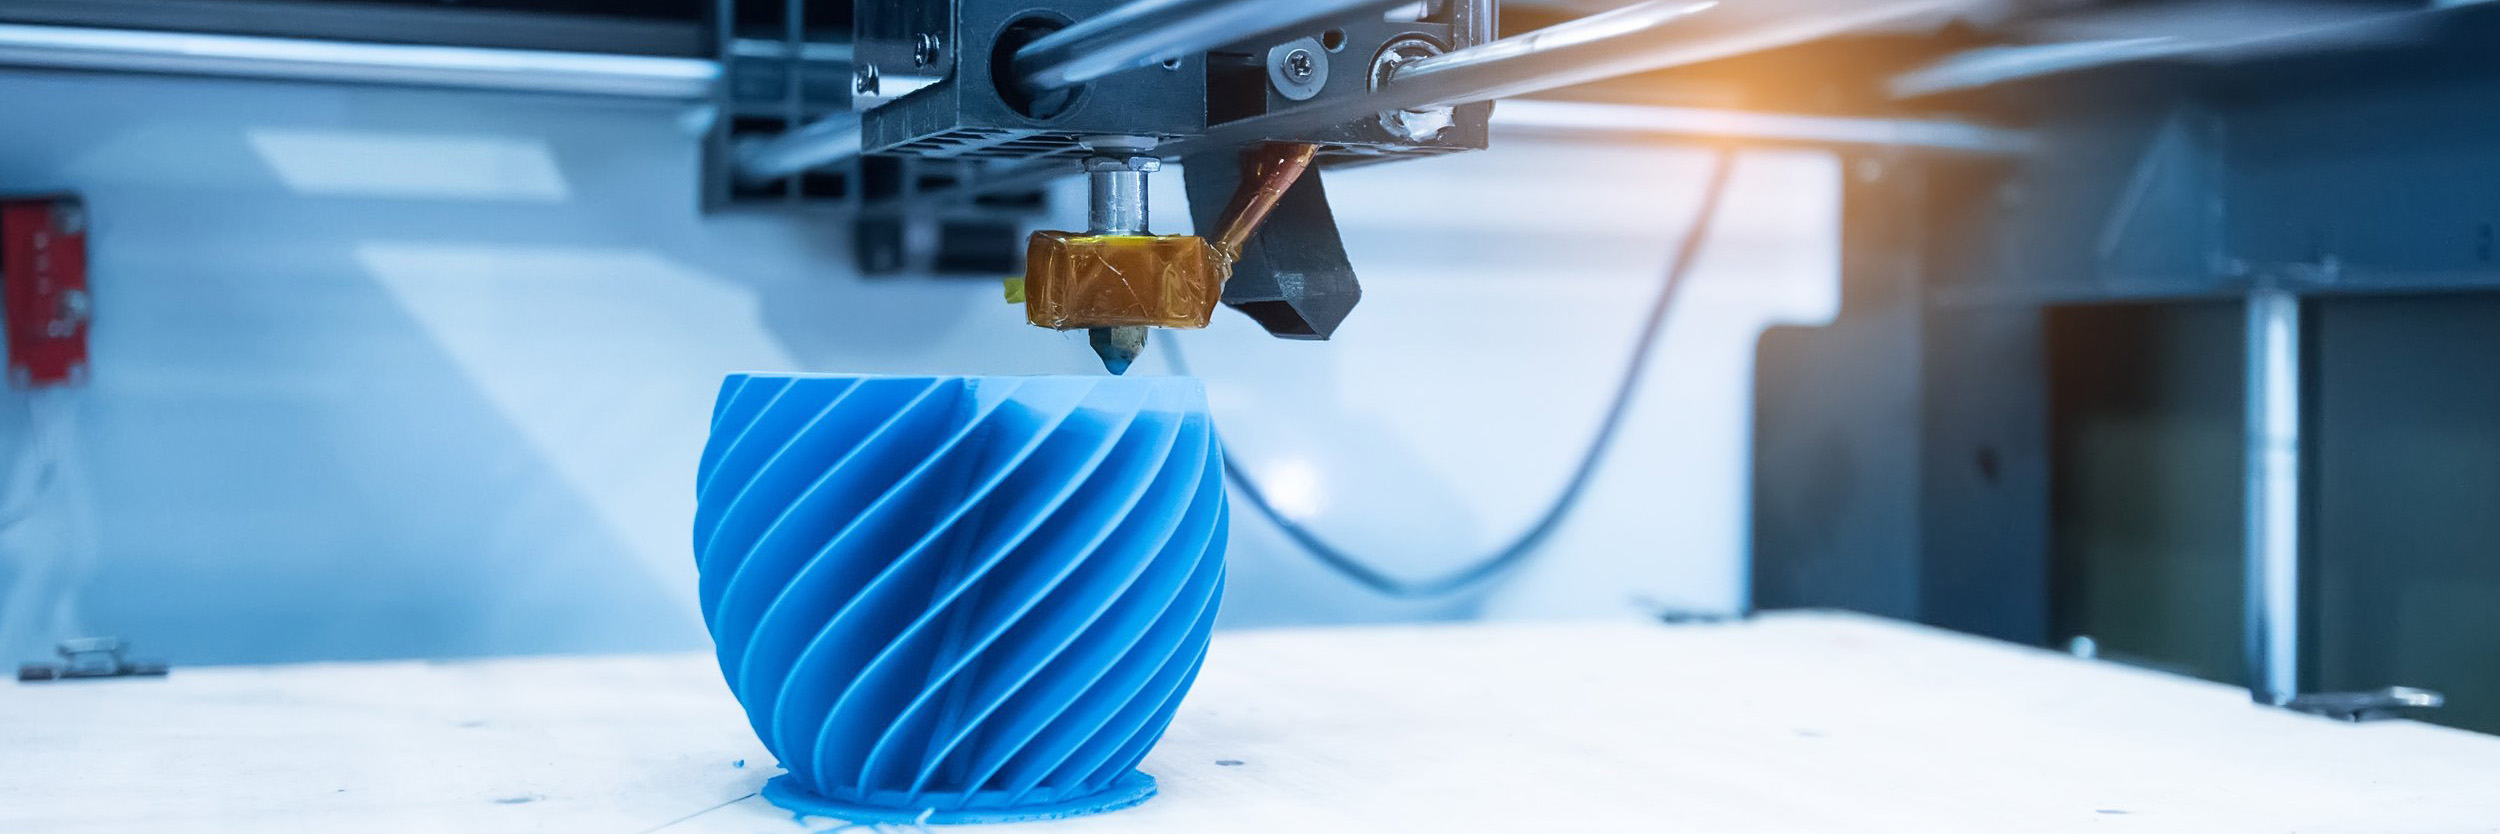 Injection-Molding-vs-3D-Printing-Which-Is-Better-In-2022-7 3x1